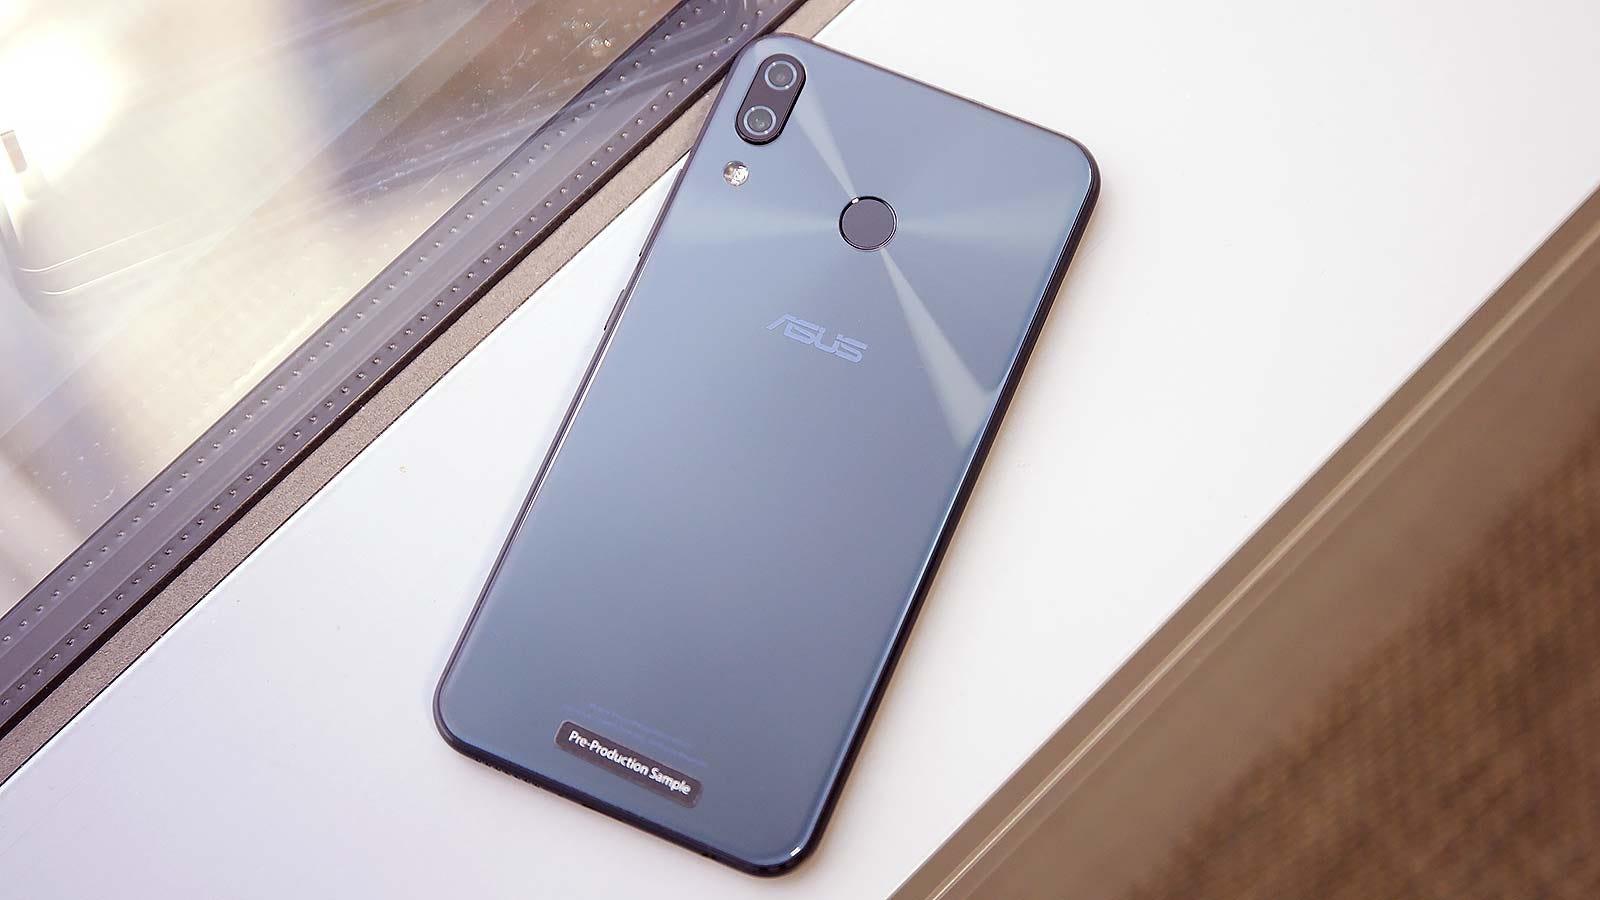 Asus Basically Made A More Affordable Iphone X Ripoff With Android